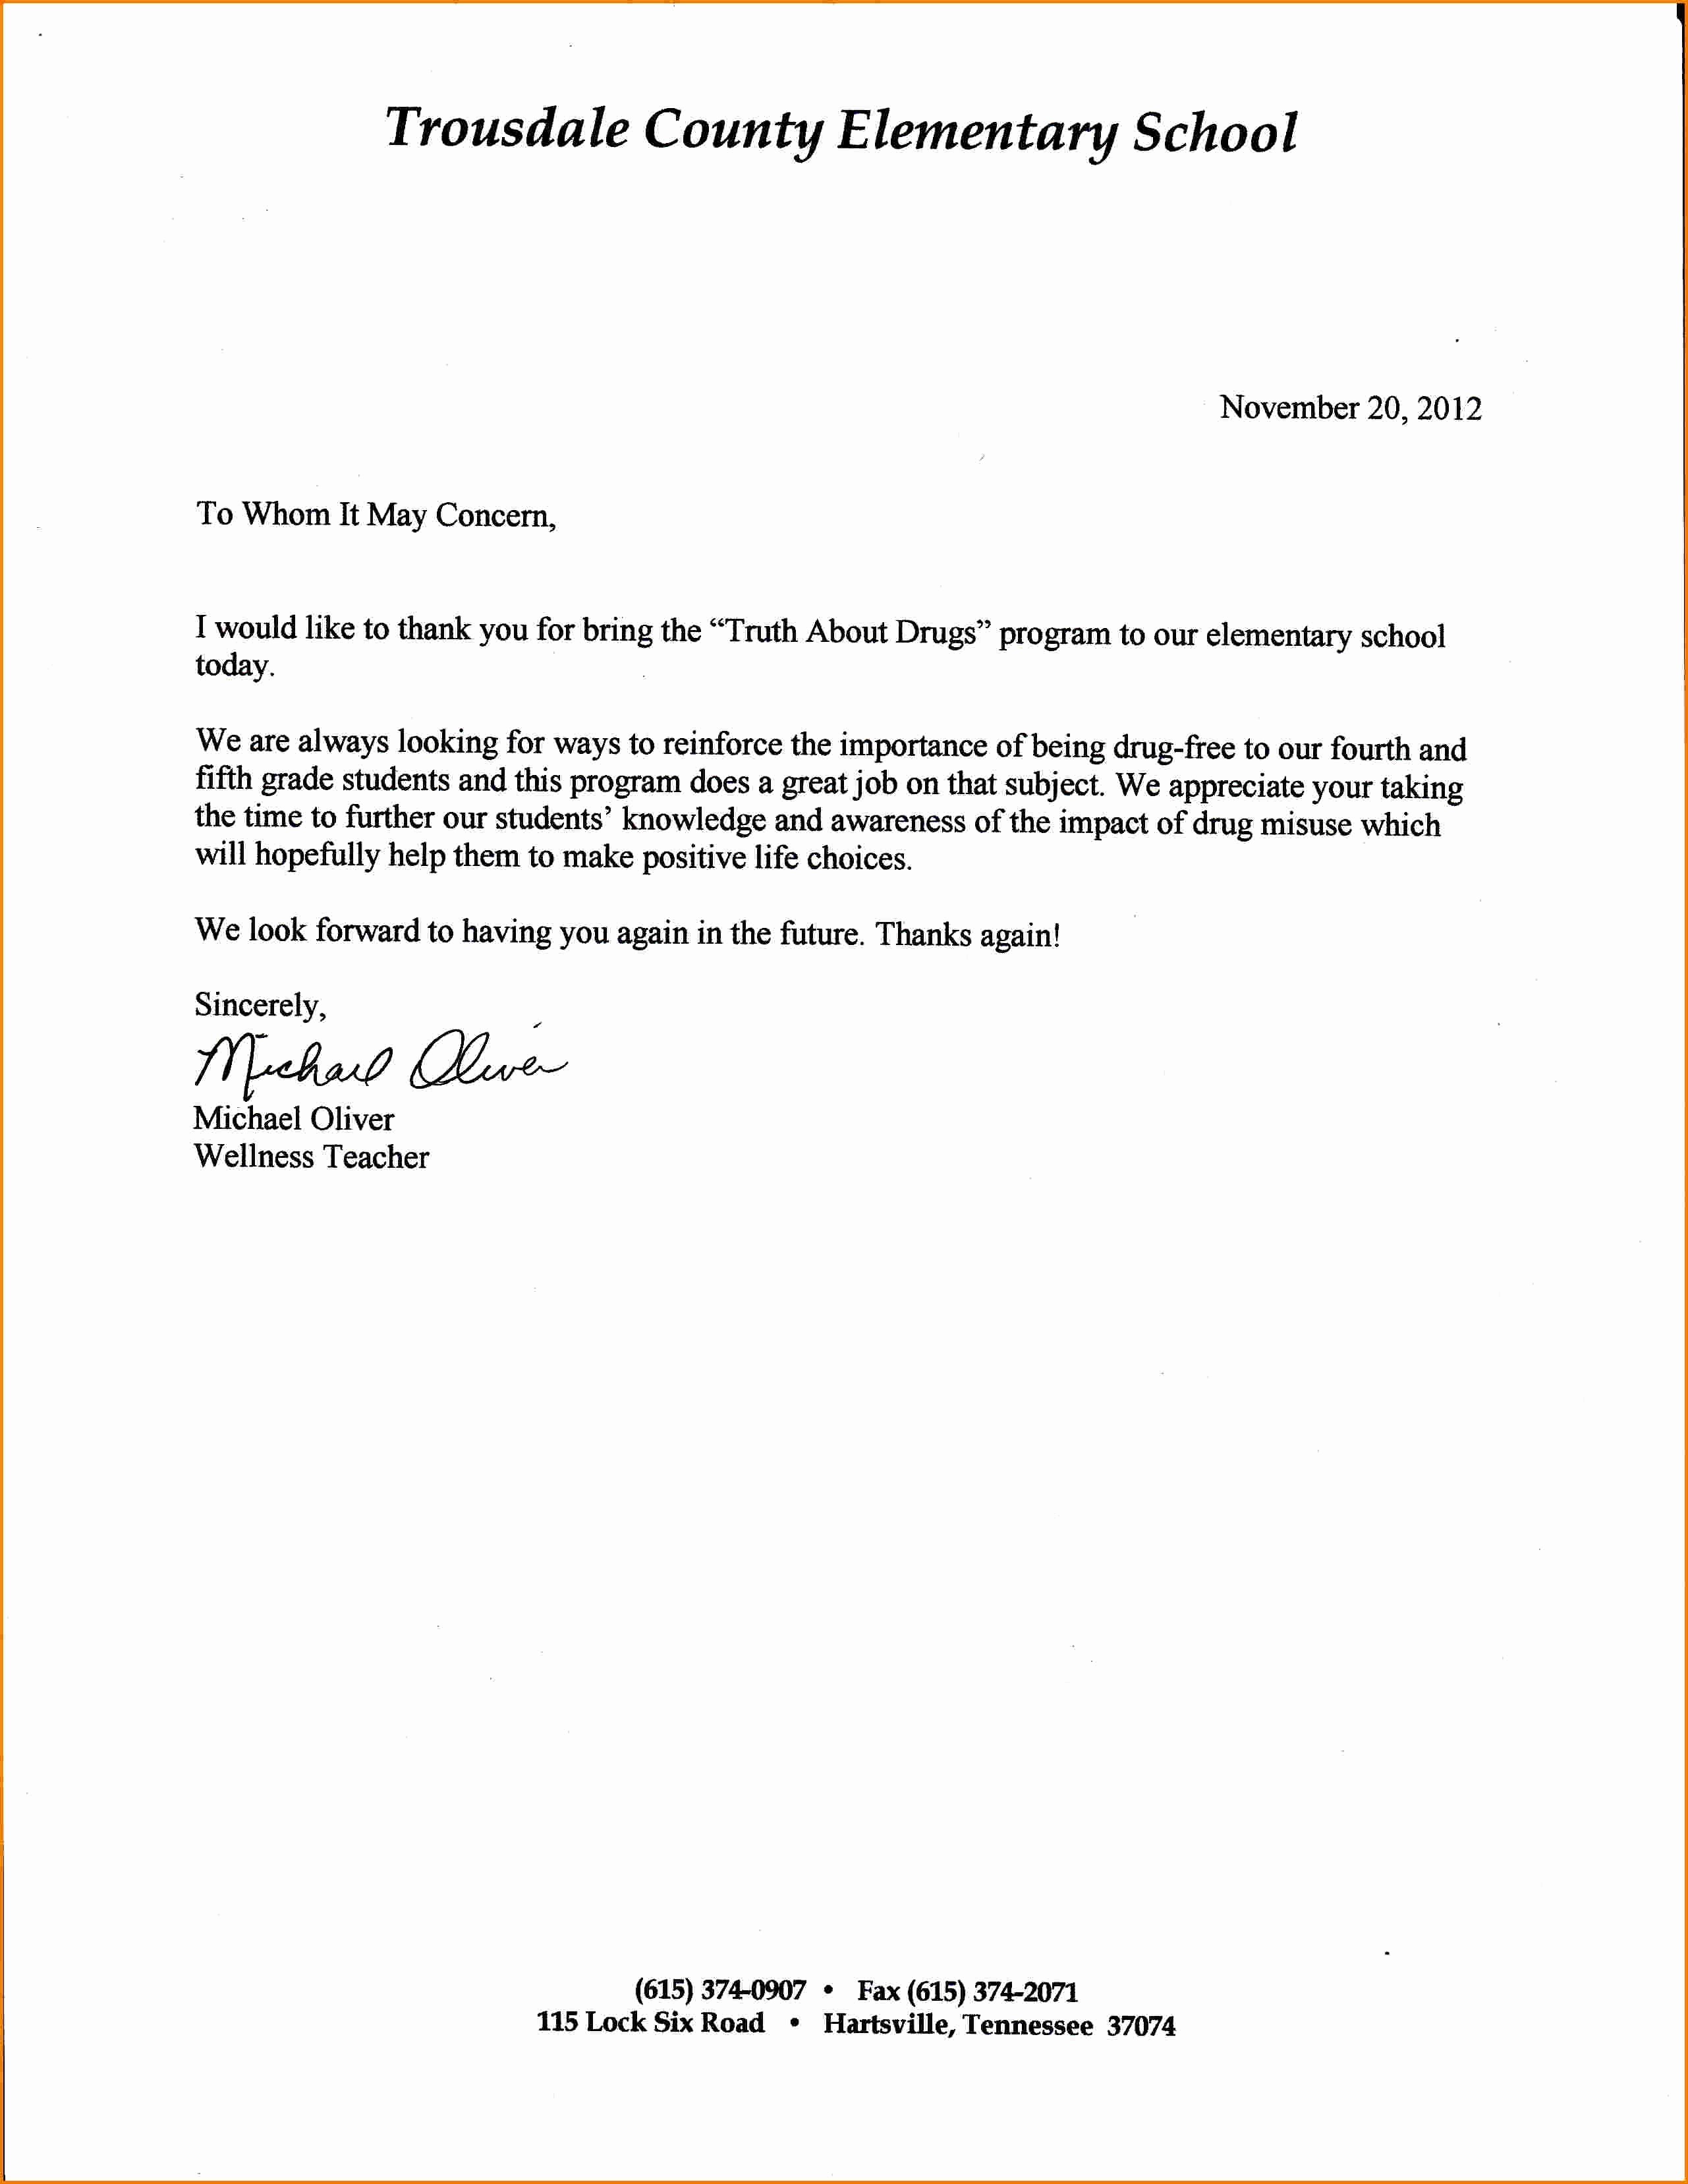 Letter Of Recommendation with Letterhead Fresh Re Mendation Letter for Student